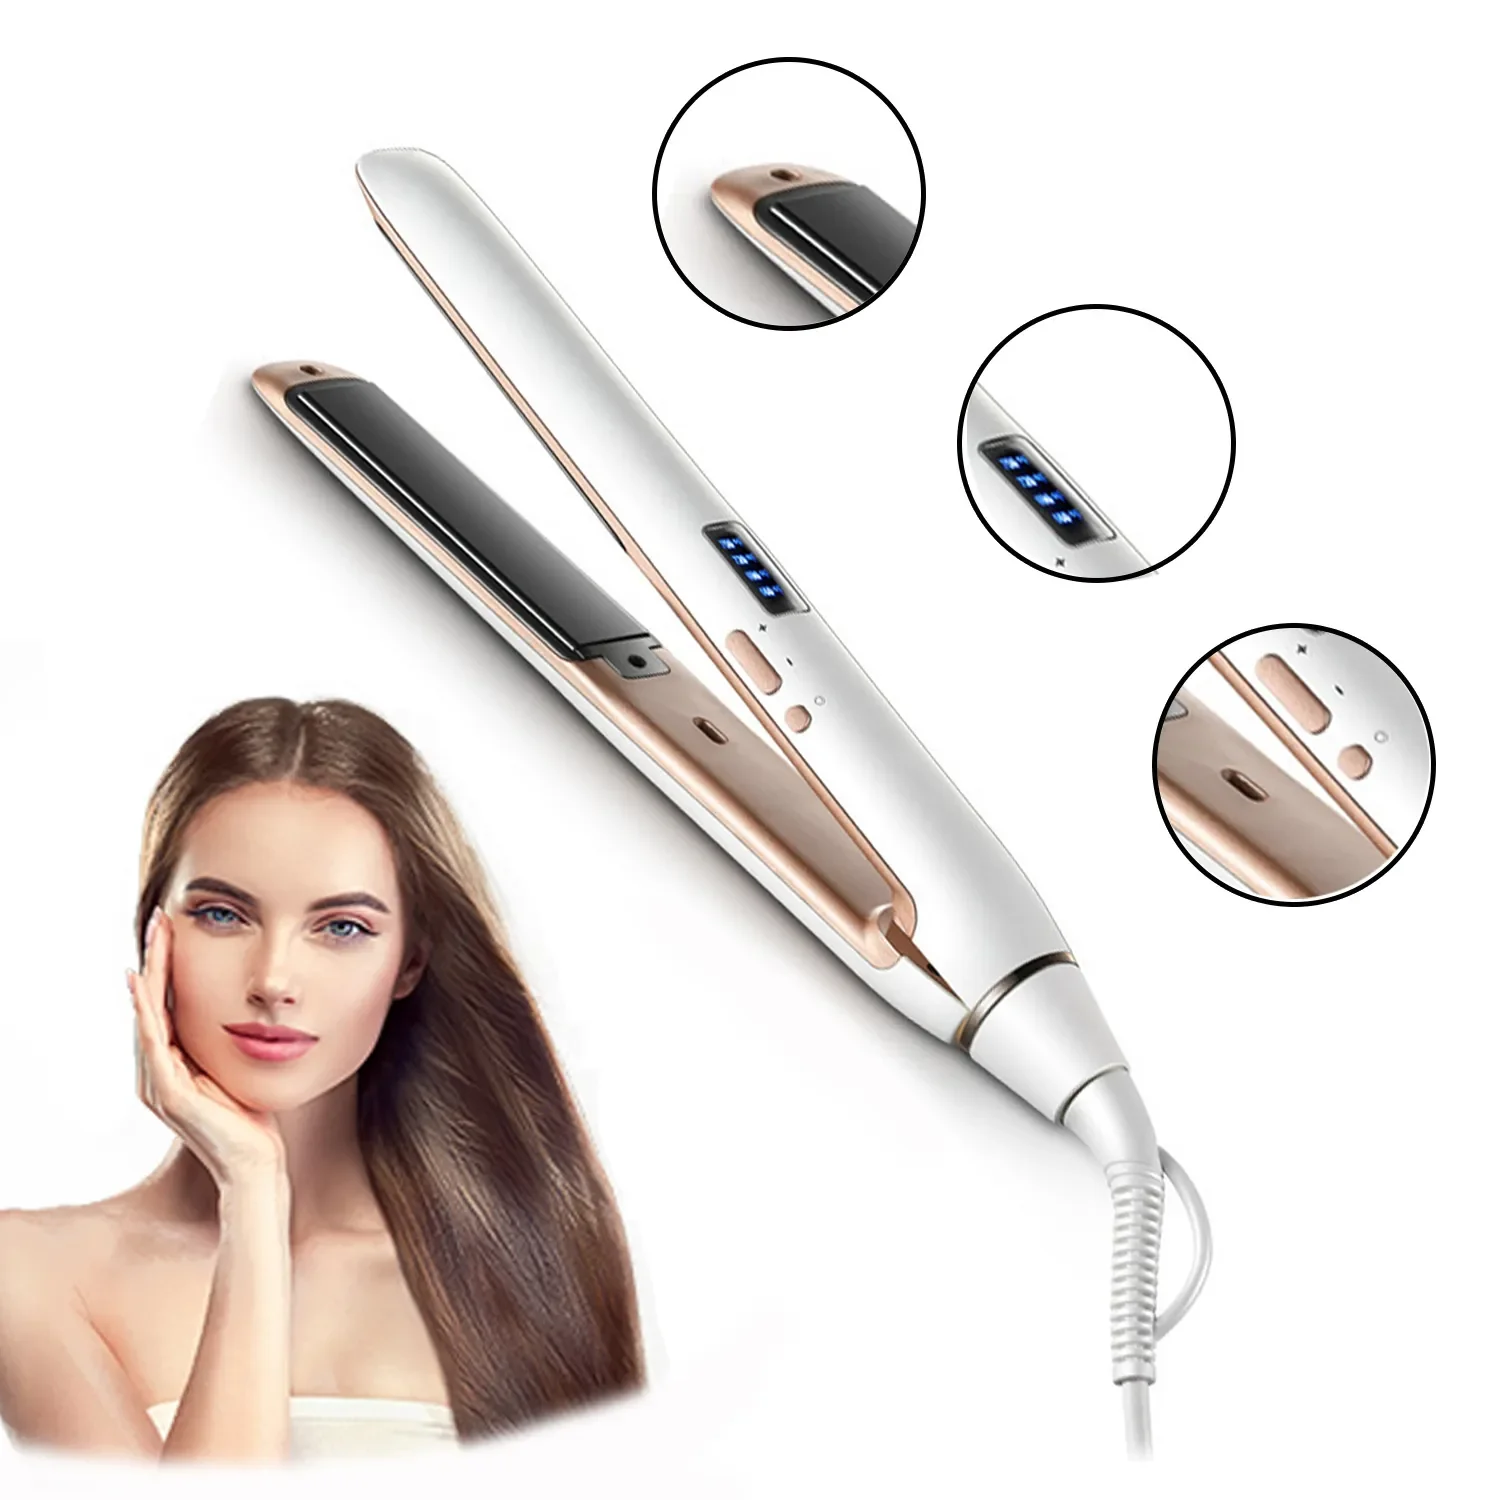 

NEW Professional 2 In 1 Flat Iron Hair Straightener Ceramic Led Display Curling Iron Fast Heated Hair Straighting Style Tool Dro